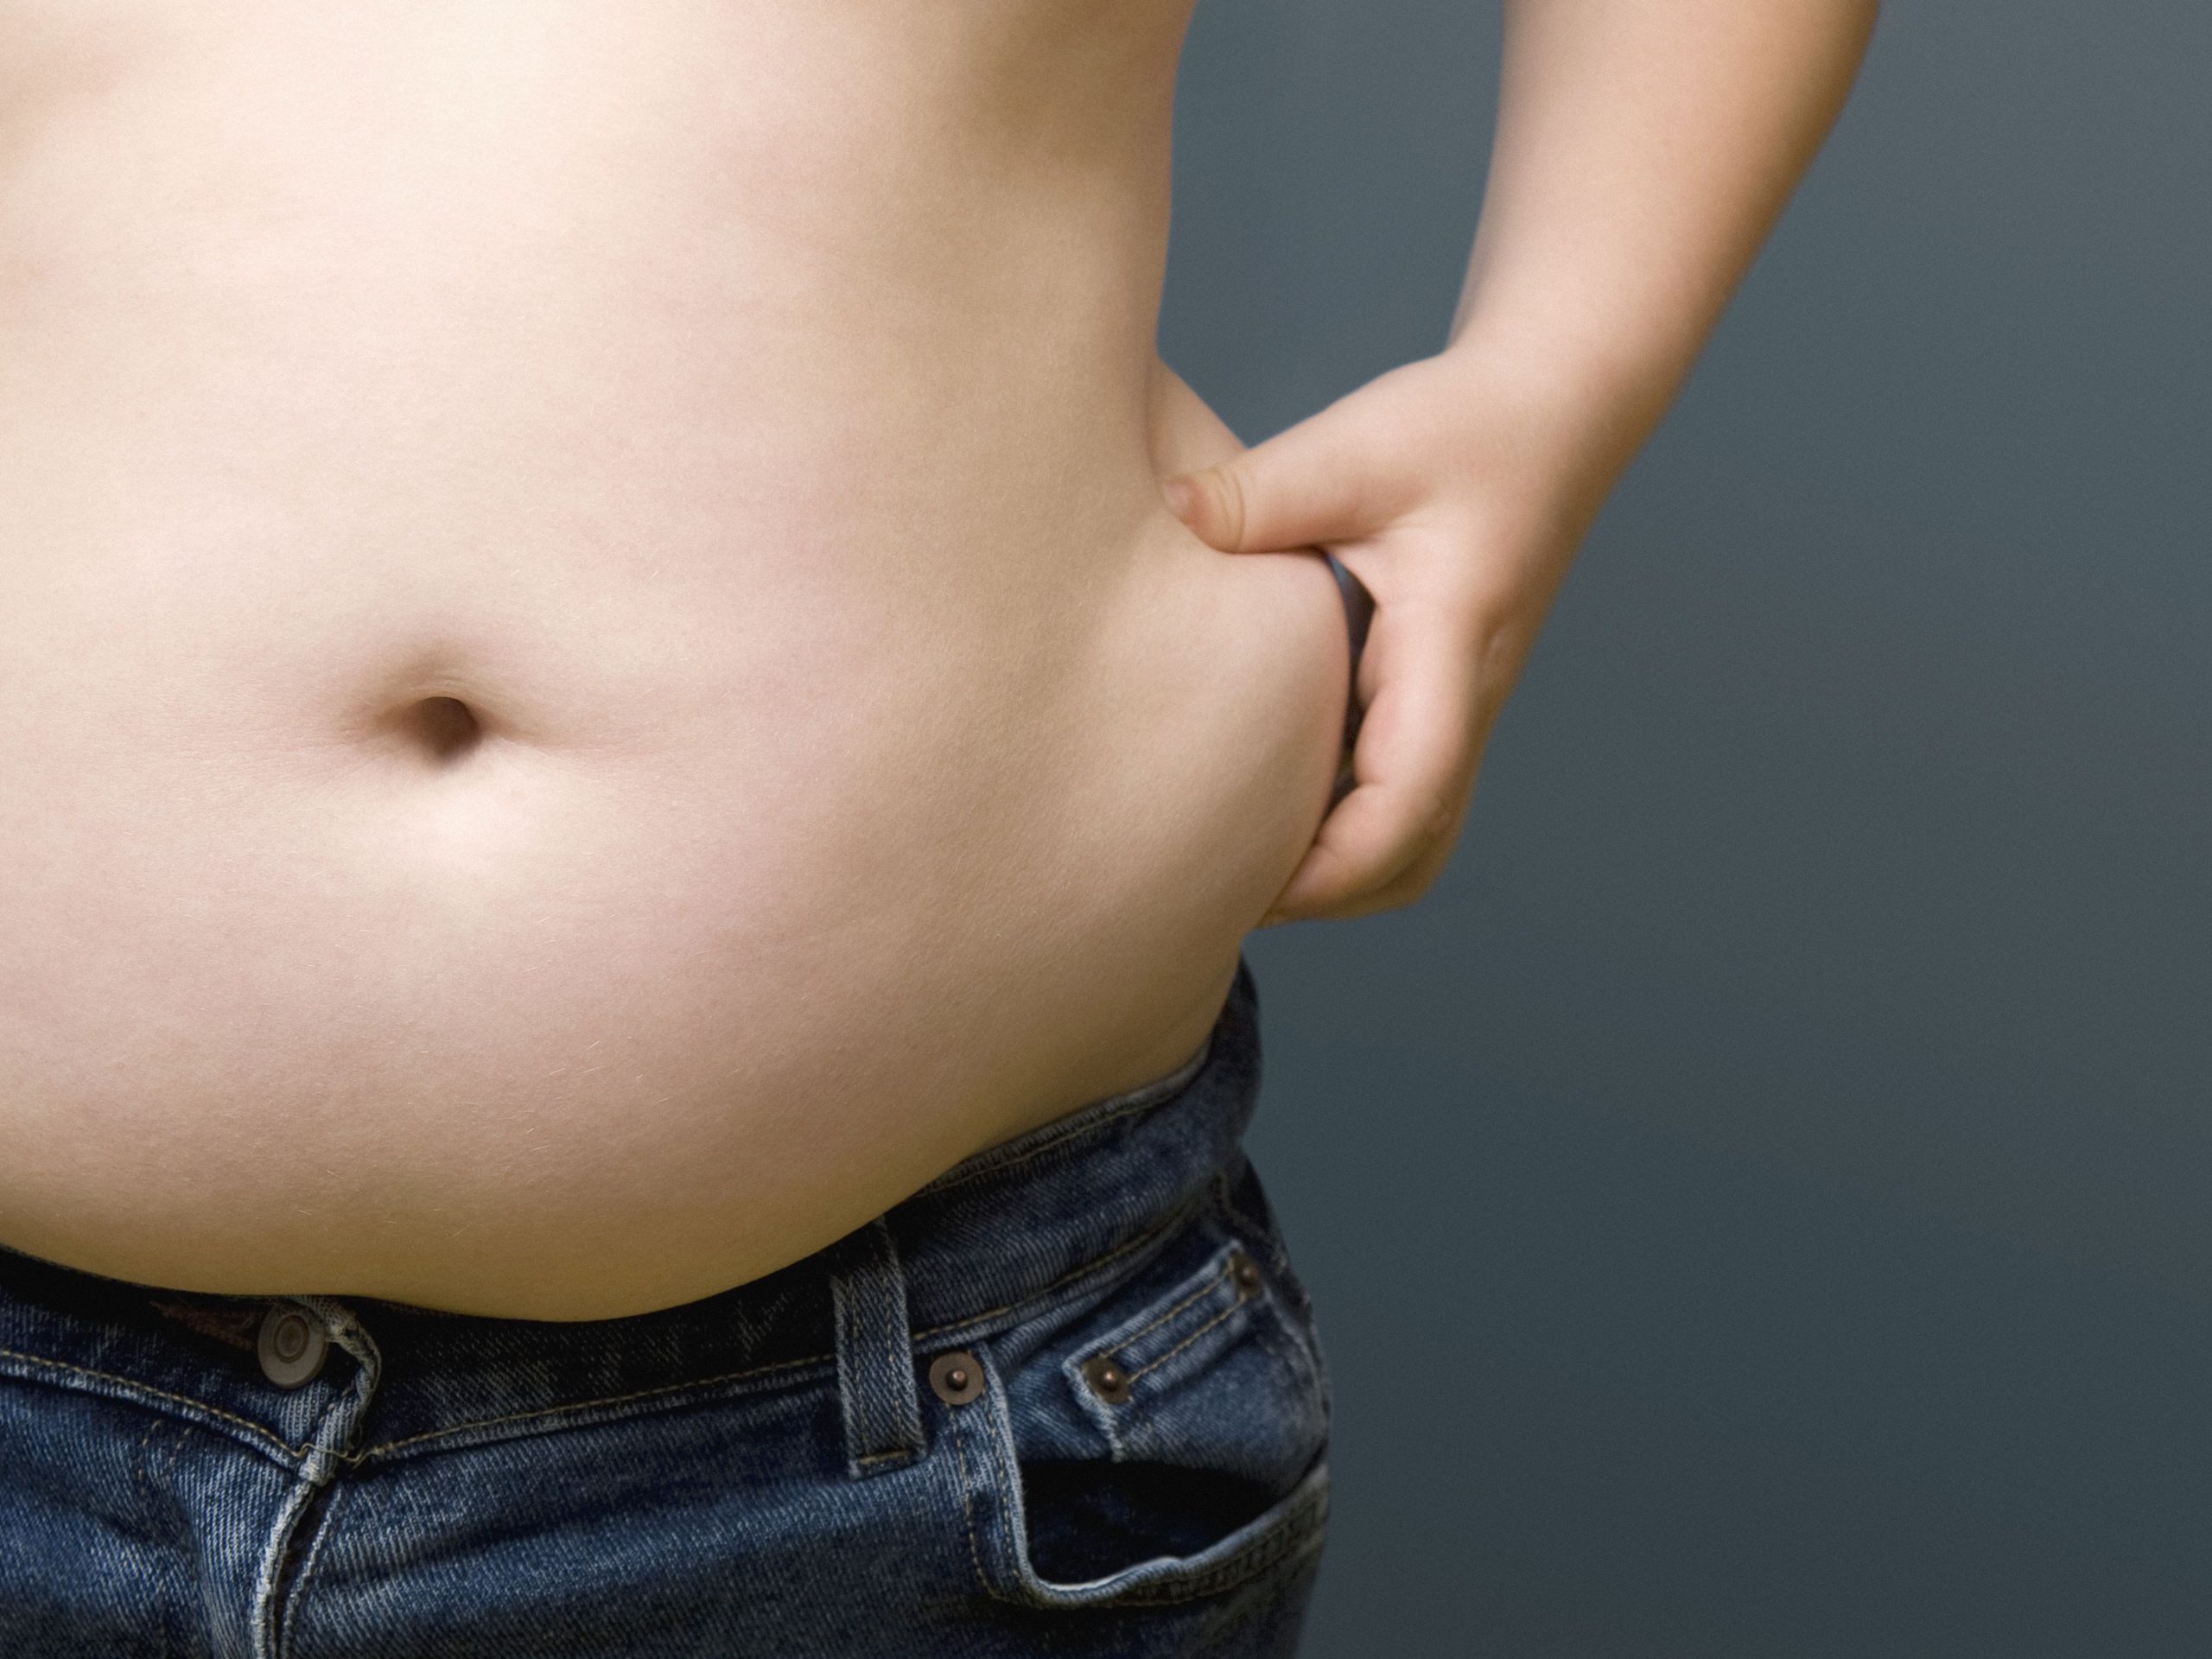 Liposuction Surgery For Male in Hyderabad, India